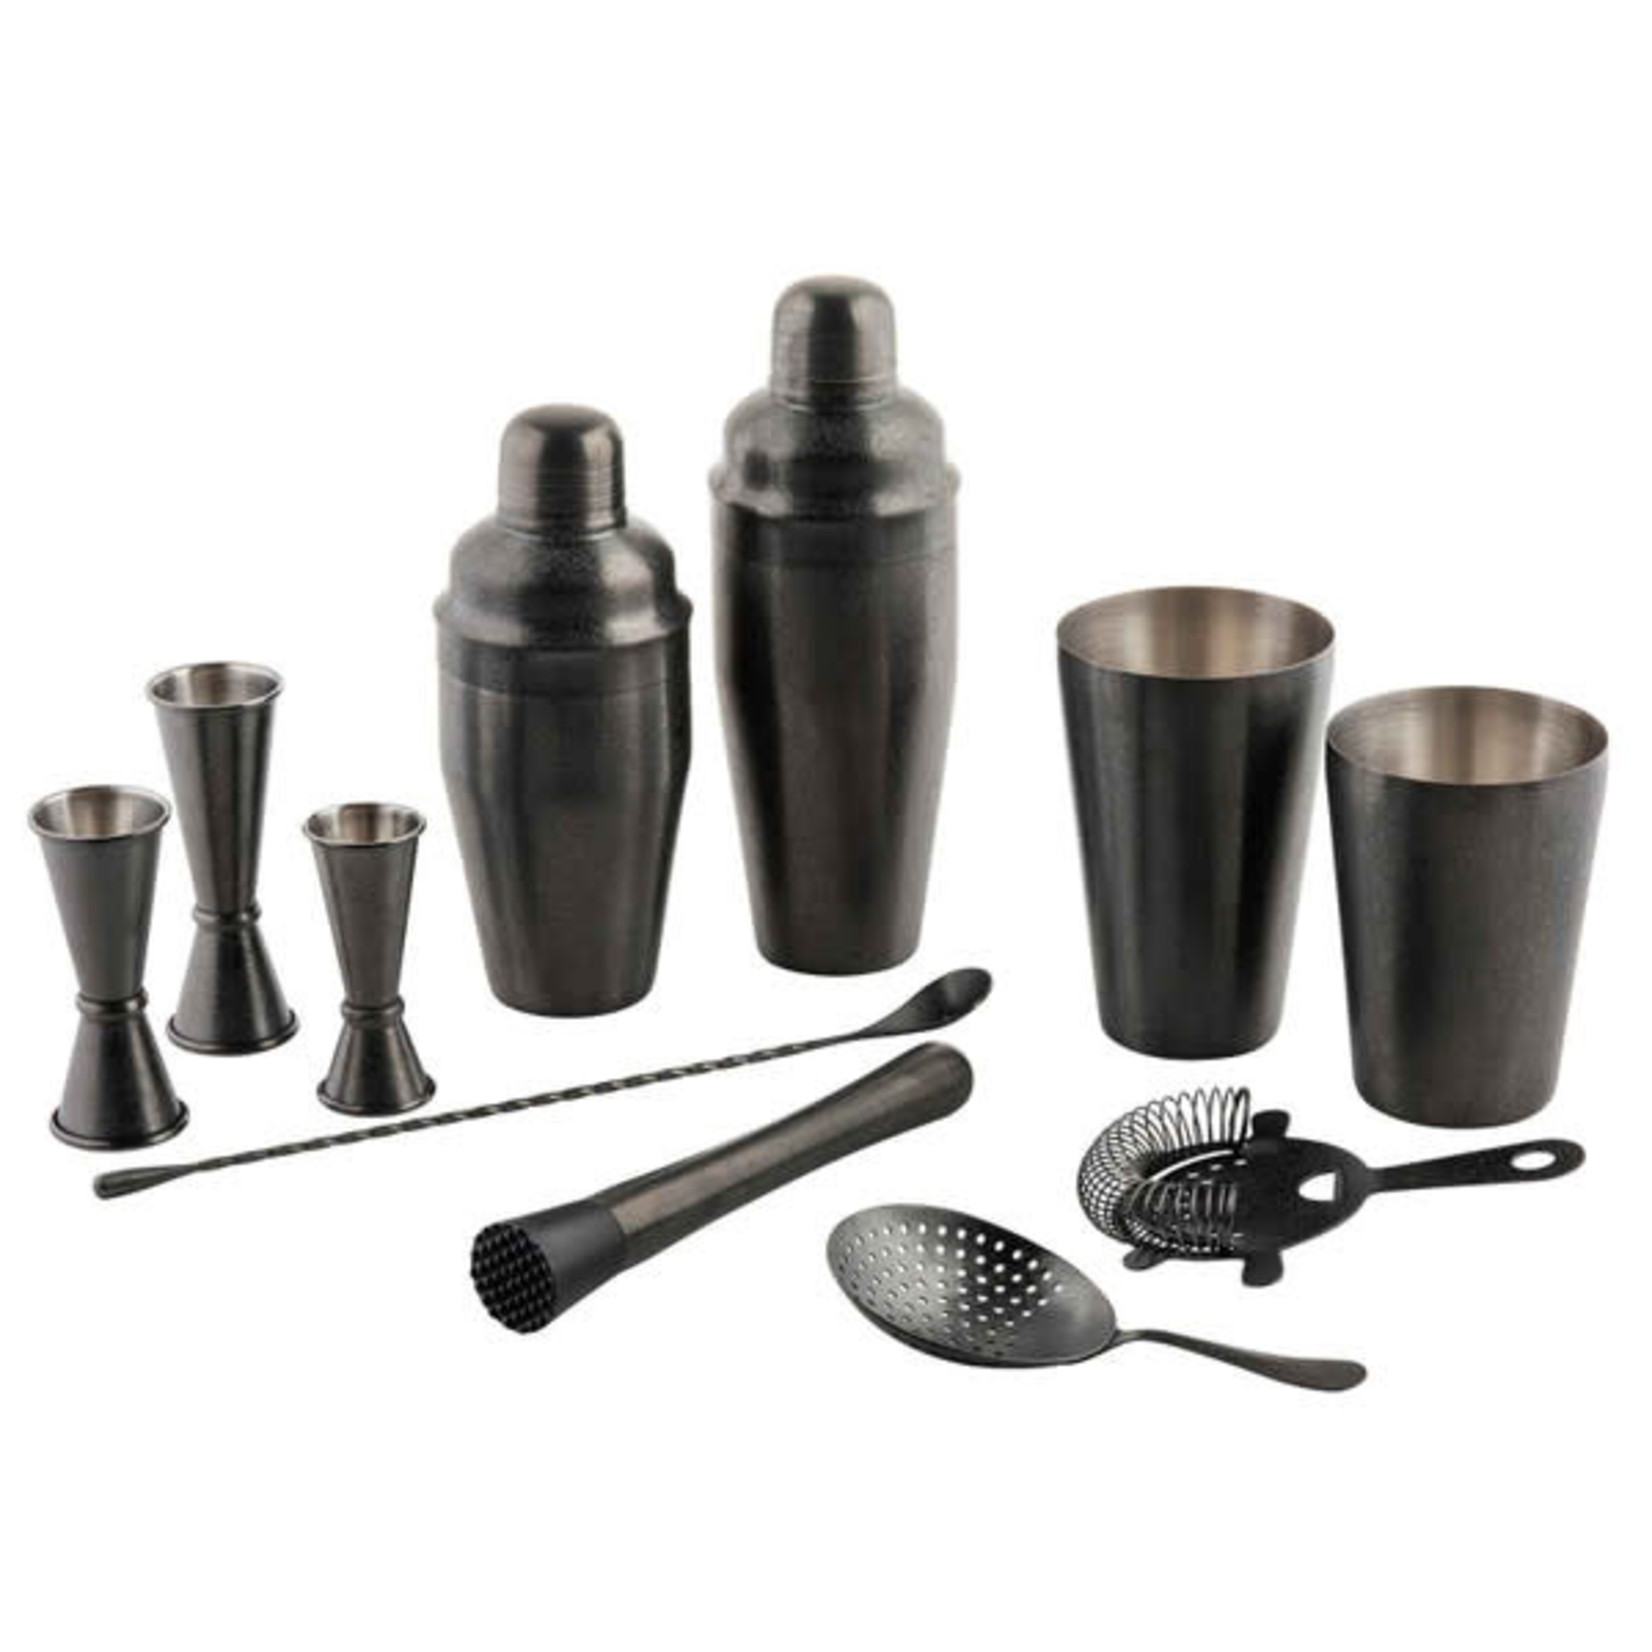 TableCraft 24 oz 3-Piece Cocktail Shaker 18/8 Stainless Steel Black Acid Etched 3.25 x 3.25 x 10"